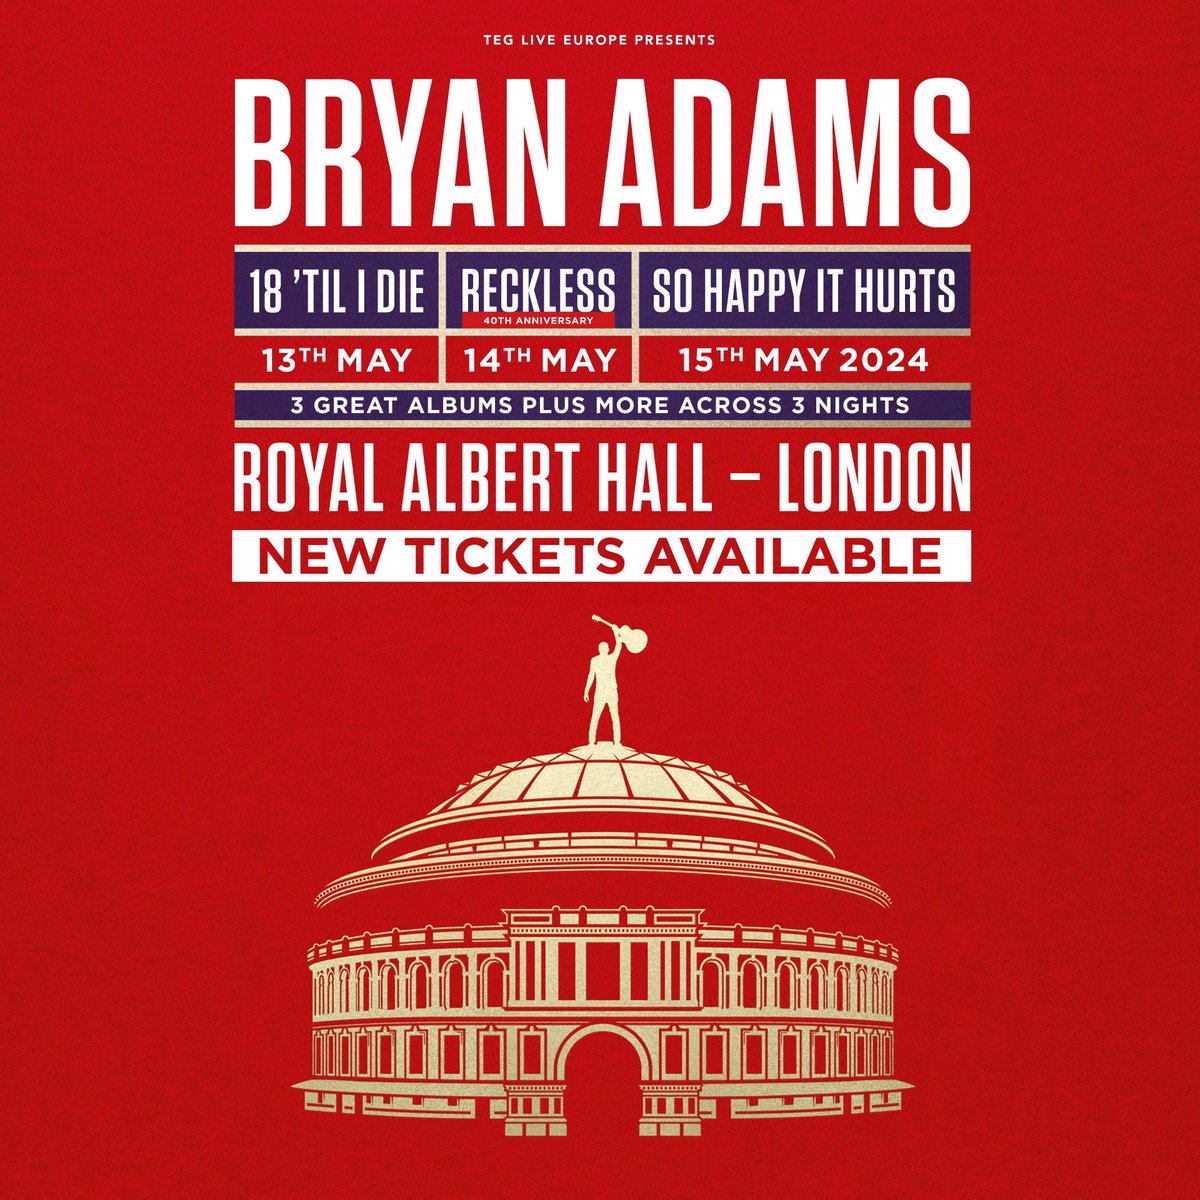 Returning to the Royal Albert Hall May 13-15 to perform 18 'Til I Die, Reckless, and So Happy It Hurts!

A new limited amount of tickets available now at bit.ly/BryanAdamsRAH24. Let’s rock, London! 🇬🇧🎸